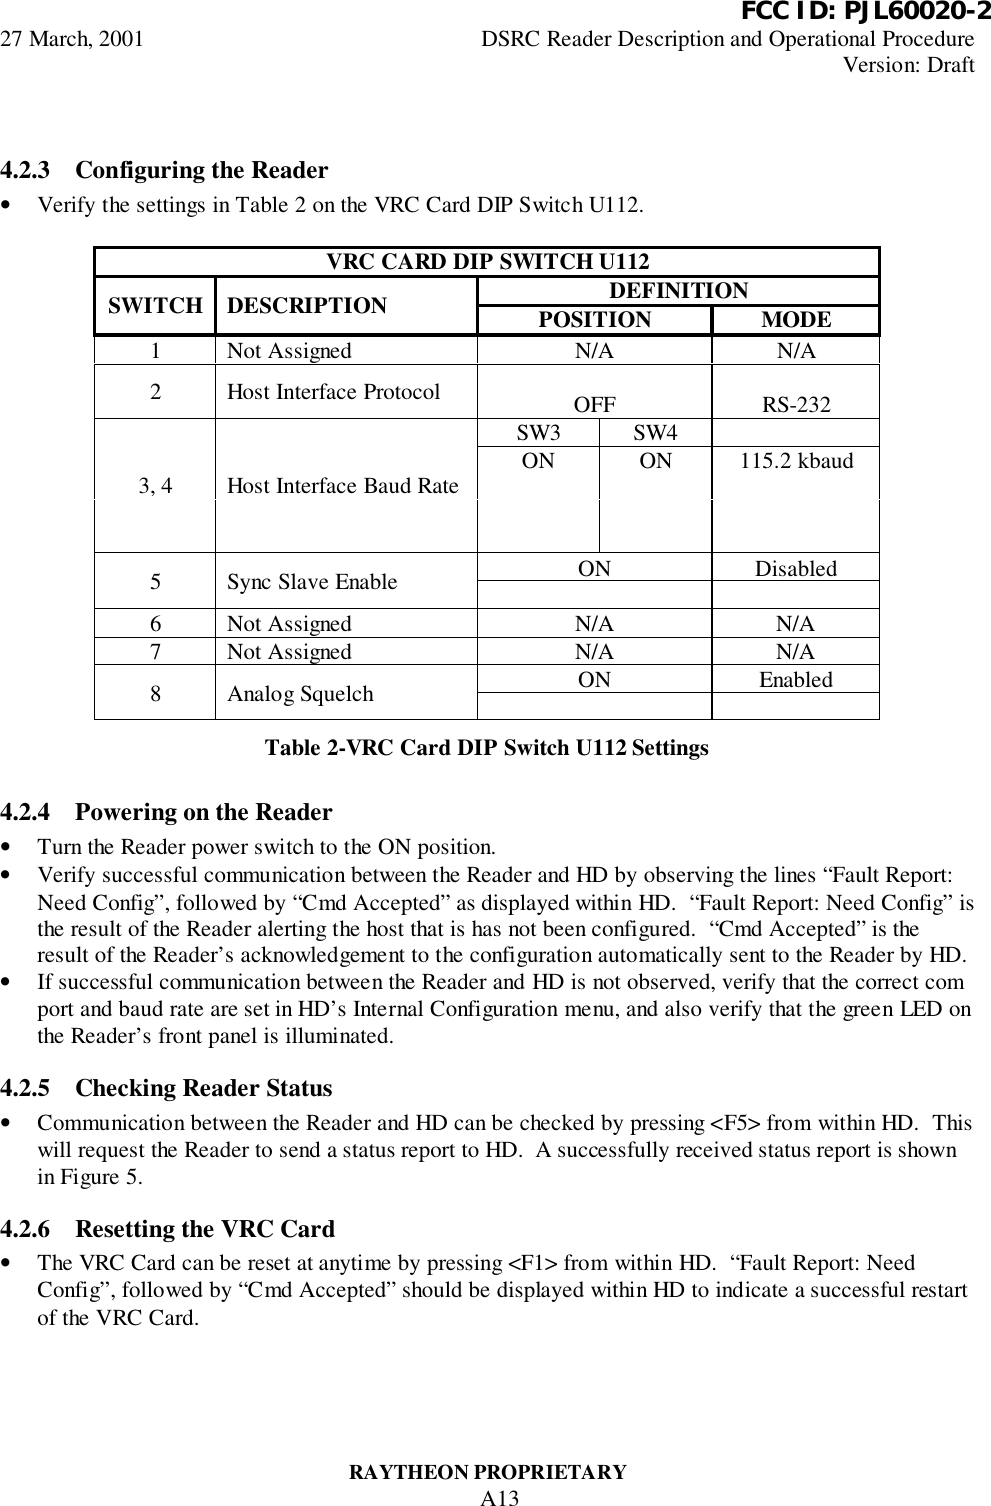          FCC ID: PJL60020-227 March, 2001 DSRC Reader Description and Operational ProcedureVersion: DraftRAYTHEON PROPRIETARYA134.2.3 Configuring the Reader• Verify the settings in Table 2 on the VRC Card DIP Switch U112.VRC CARD DIP SWITCH U112DEFINITIONSWITCH DESCRIPTION POSITION MODE1 Not Assigned N/A N/A2 Host Interface Protocol OFF RS-232SW3 SW4ON ON 115.2 kbaud3, 4 Host Interface Baud RateON Disabled5 Sync Slave Enable6 Not Assigned N/A N/A7 Not Assigned N/A N/AON Enabled8 Analog SquelchTable 2-VRC Card DIP Switch U112 Settings4.2.4 Powering on the Reader• Turn the Reader power switch to the ON position.• Verify successful communication between the Reader and HD by observing the lines “Fault Report:Need Config”, followed by “Cmd Accepted” as displayed within HD.  “Fault Report: Need Config” isthe result of the Reader alerting the host that is has not been configured.  “Cmd Accepted” is theresult of the Reader’s acknowledgement to the configuration automatically sent to the Reader by HD.• If successful communication between the Reader and HD is not observed, verify that the correct comport and baud rate are set in HD’s Internal Configuration menu, and also verify that the green LED onthe Reader’s front panel is illuminated.4.2.5 Checking Reader Status• Communication between the Reader and HD can be checked by pressing &lt;F5&gt; from within HD.  Thiswill request the Reader to send a status report to HD.  A successfully received status report is shownin Figure 5.4.2.6 Resetting the VRC Card• The VRC Card can be reset at anytime by pressing &lt;F1&gt; from within HD.  “Fault Report: NeedConfig”, followed by “Cmd Accepted” should be displayed within HD to indicate a successful restartof the VRC Card.